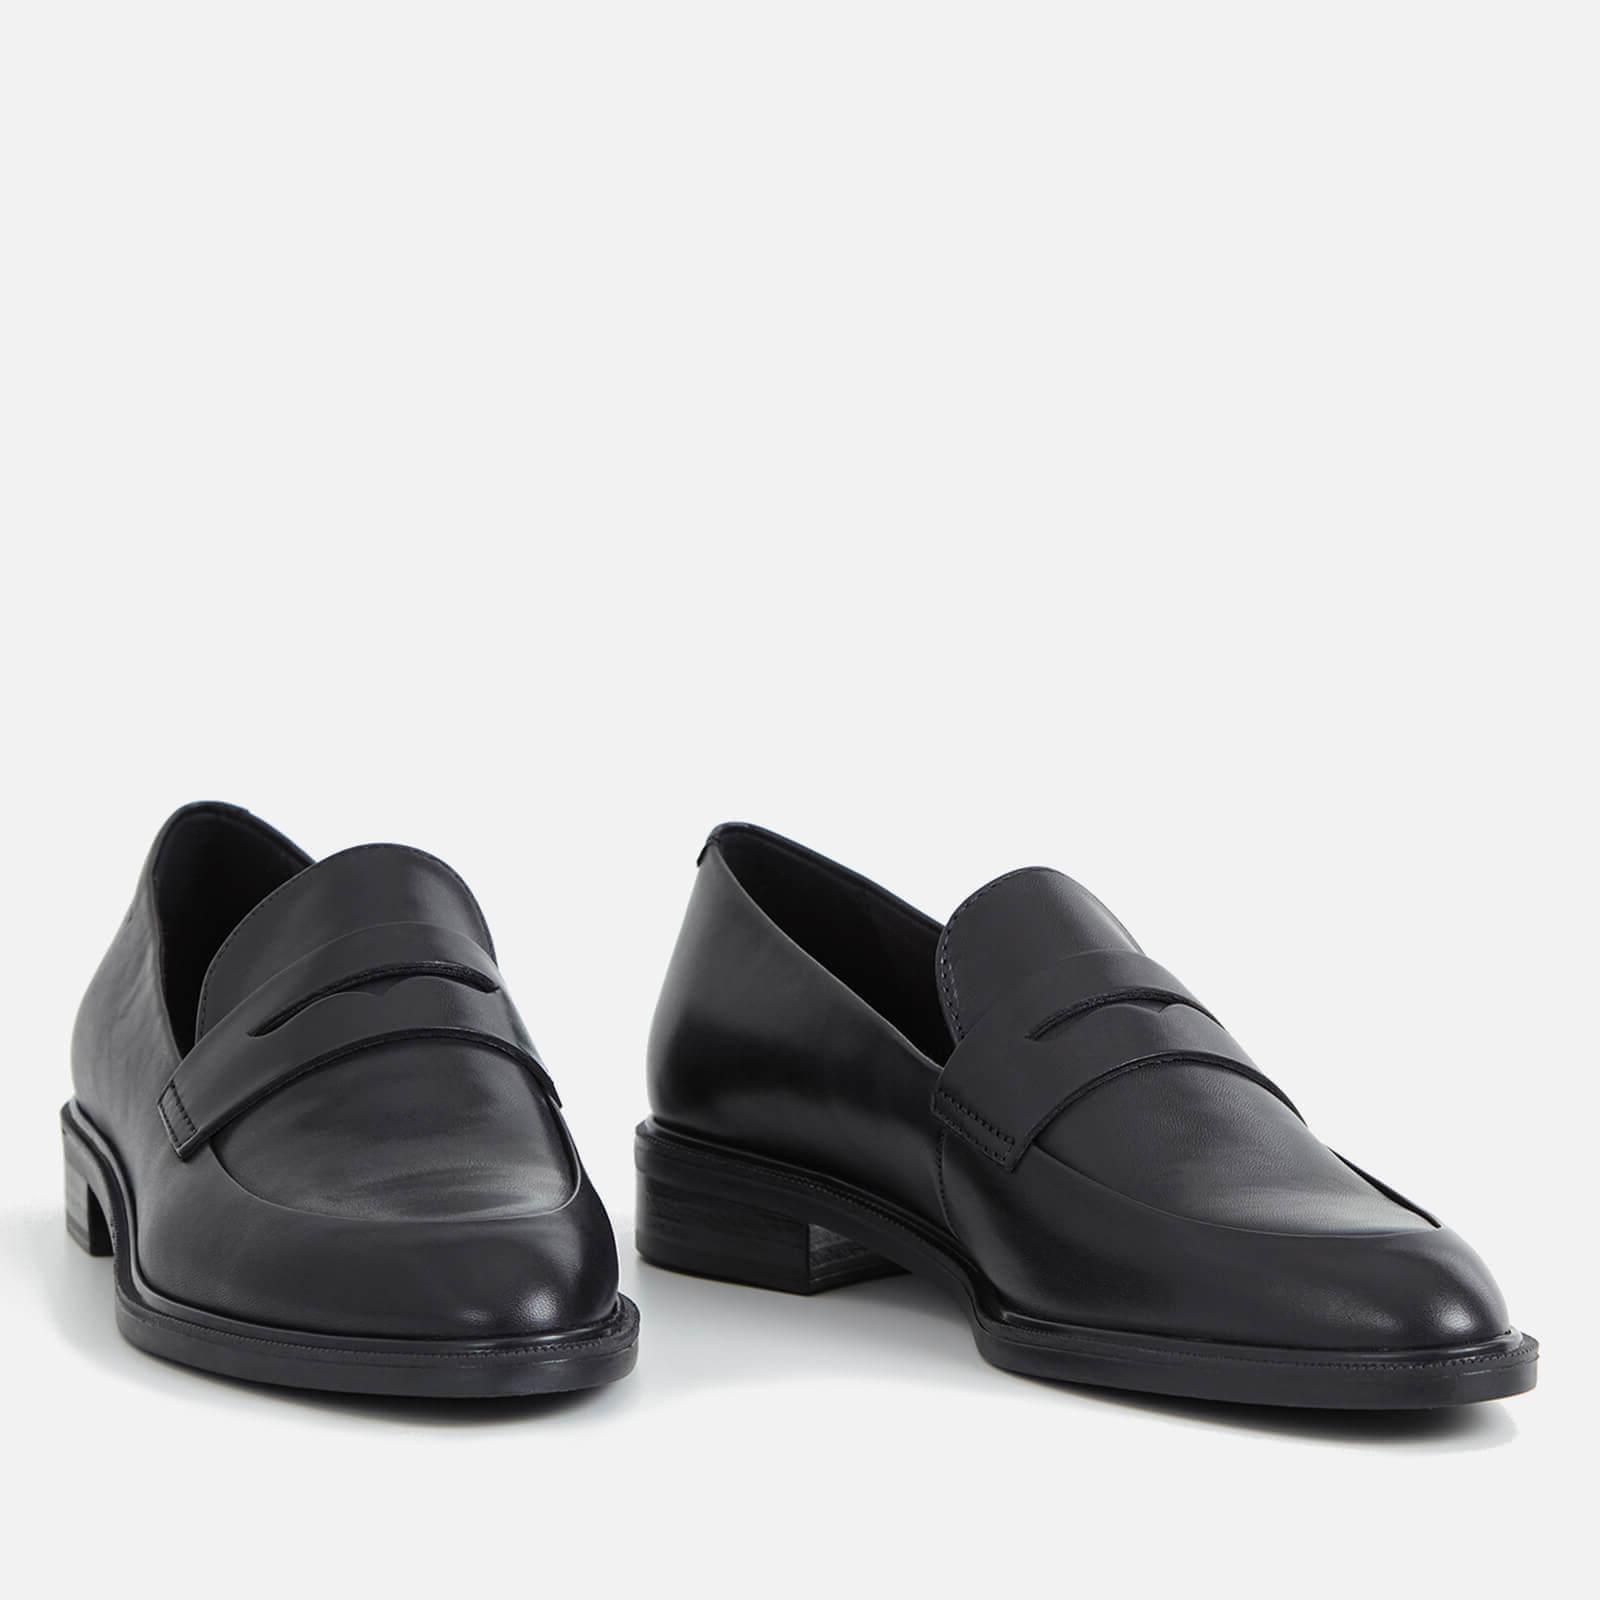 Vagabond Shoemakers Frances Leather Loafers in Black | Lyst